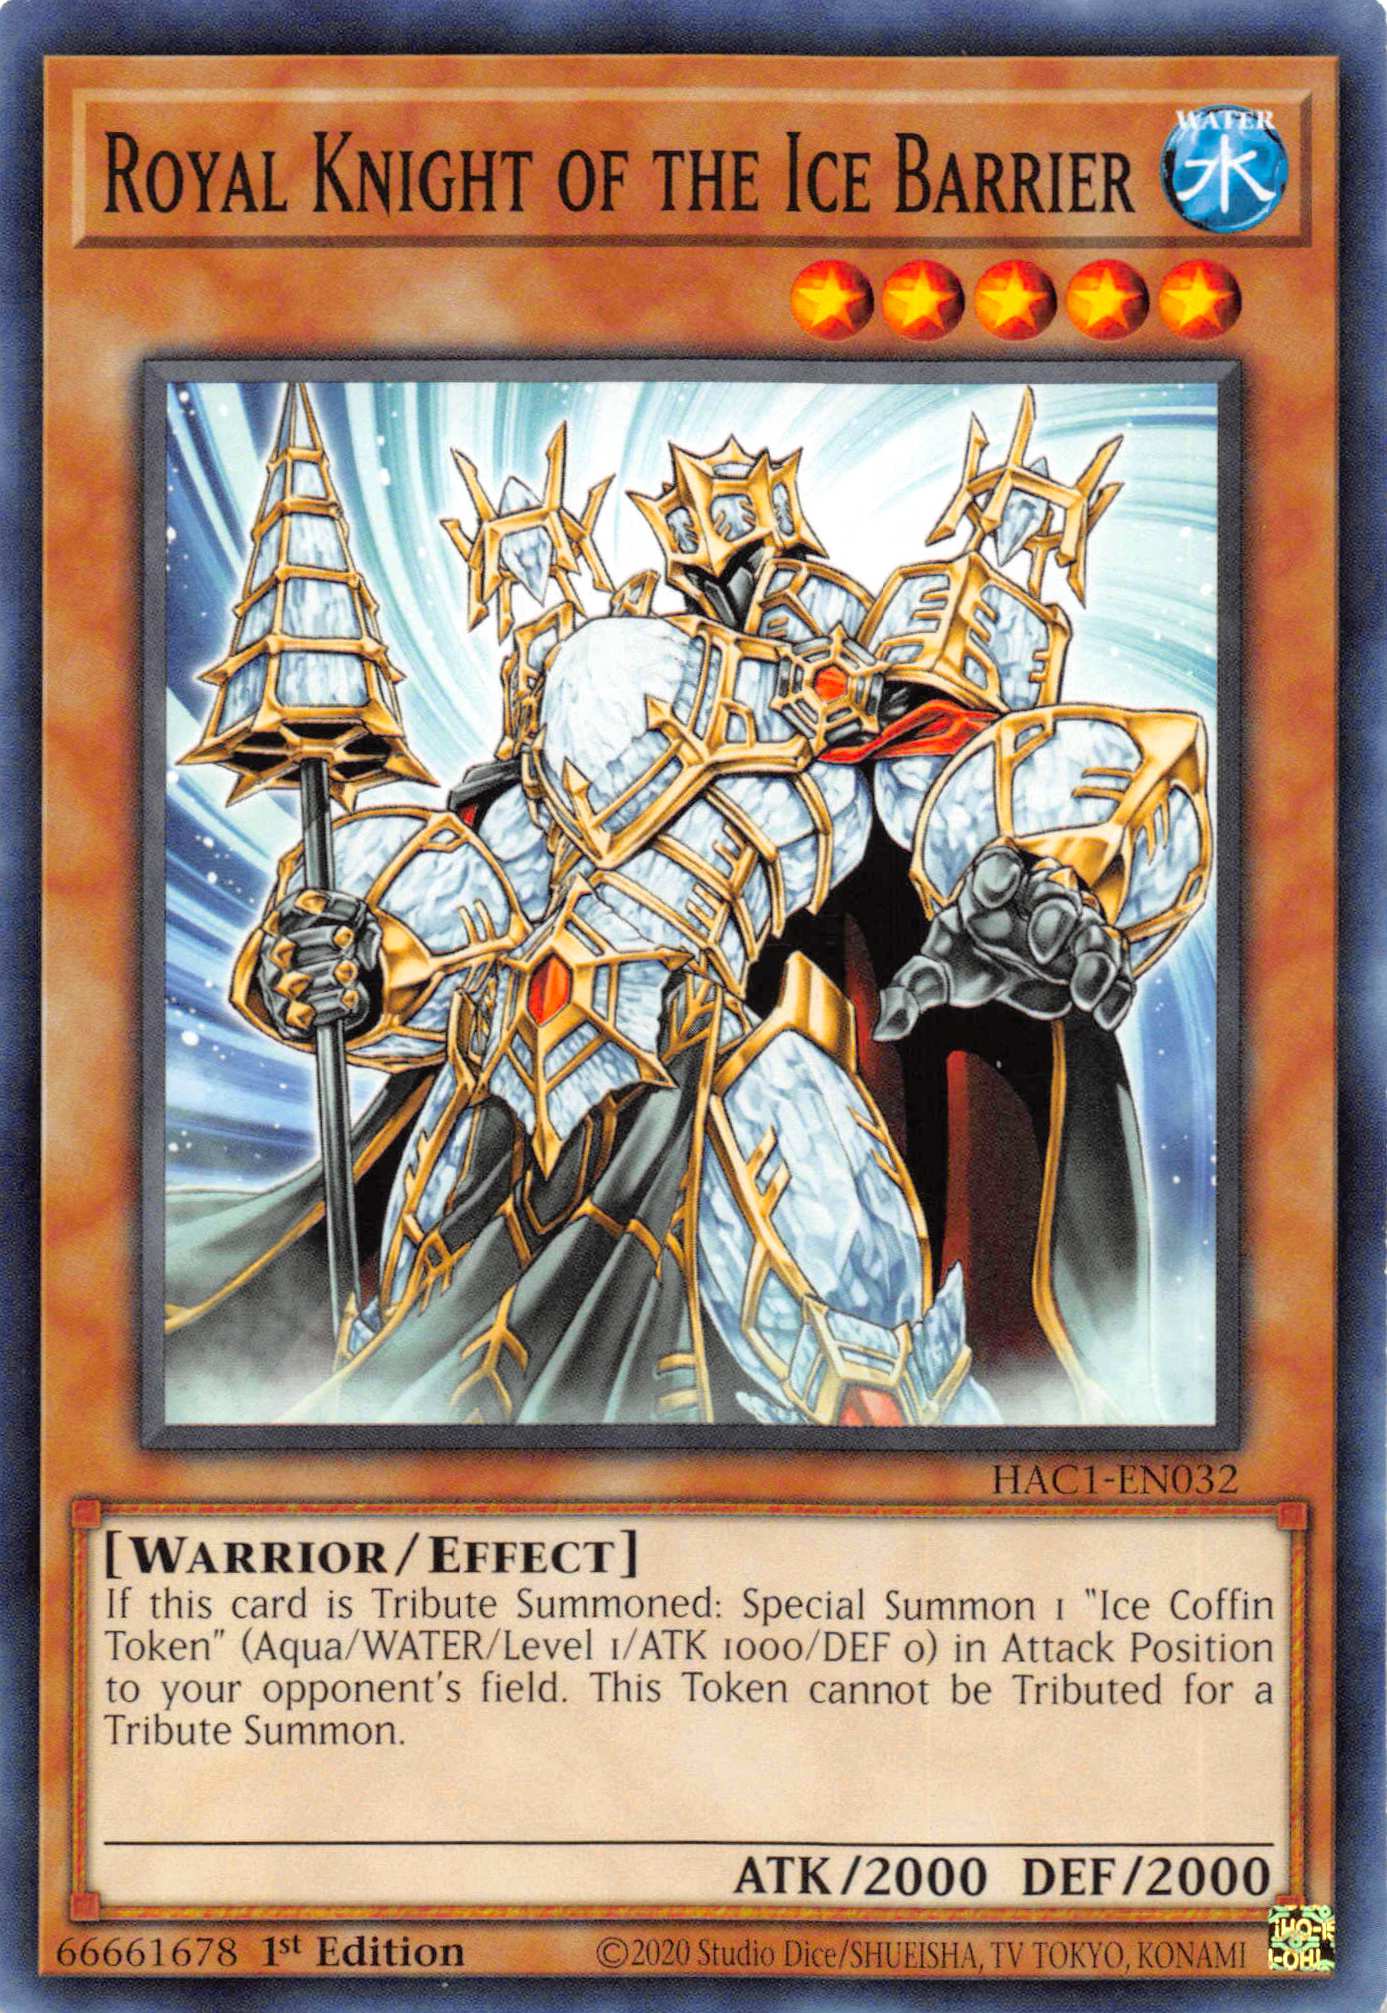 Royal Knight of the Ice Barrier (Duel Terminal) [HAC1-EN032] Parallel Rare